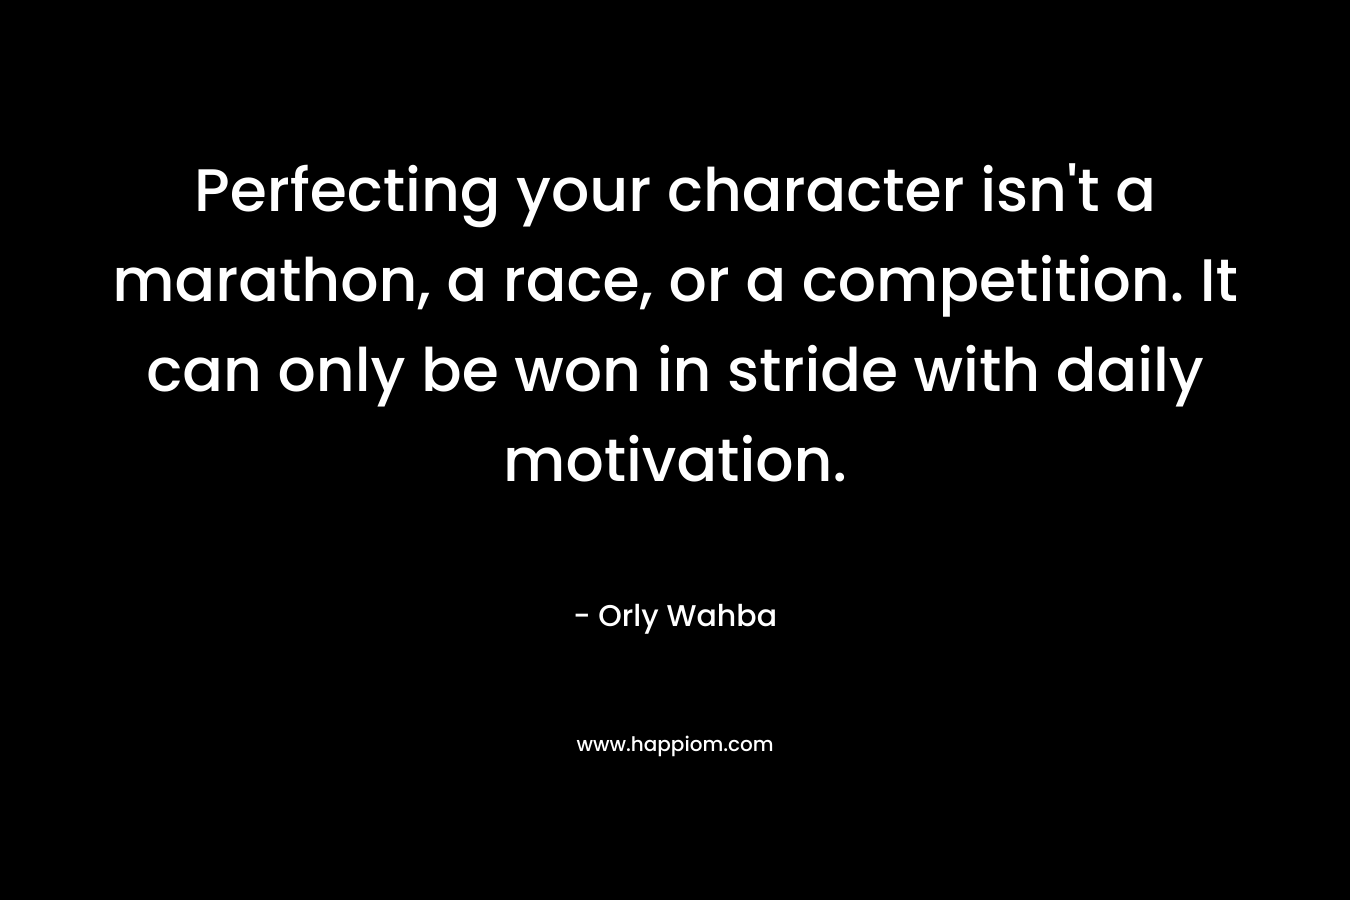 Perfecting your character isn't a marathon, a race, or a competition. It can only be won in stride with daily motivation.